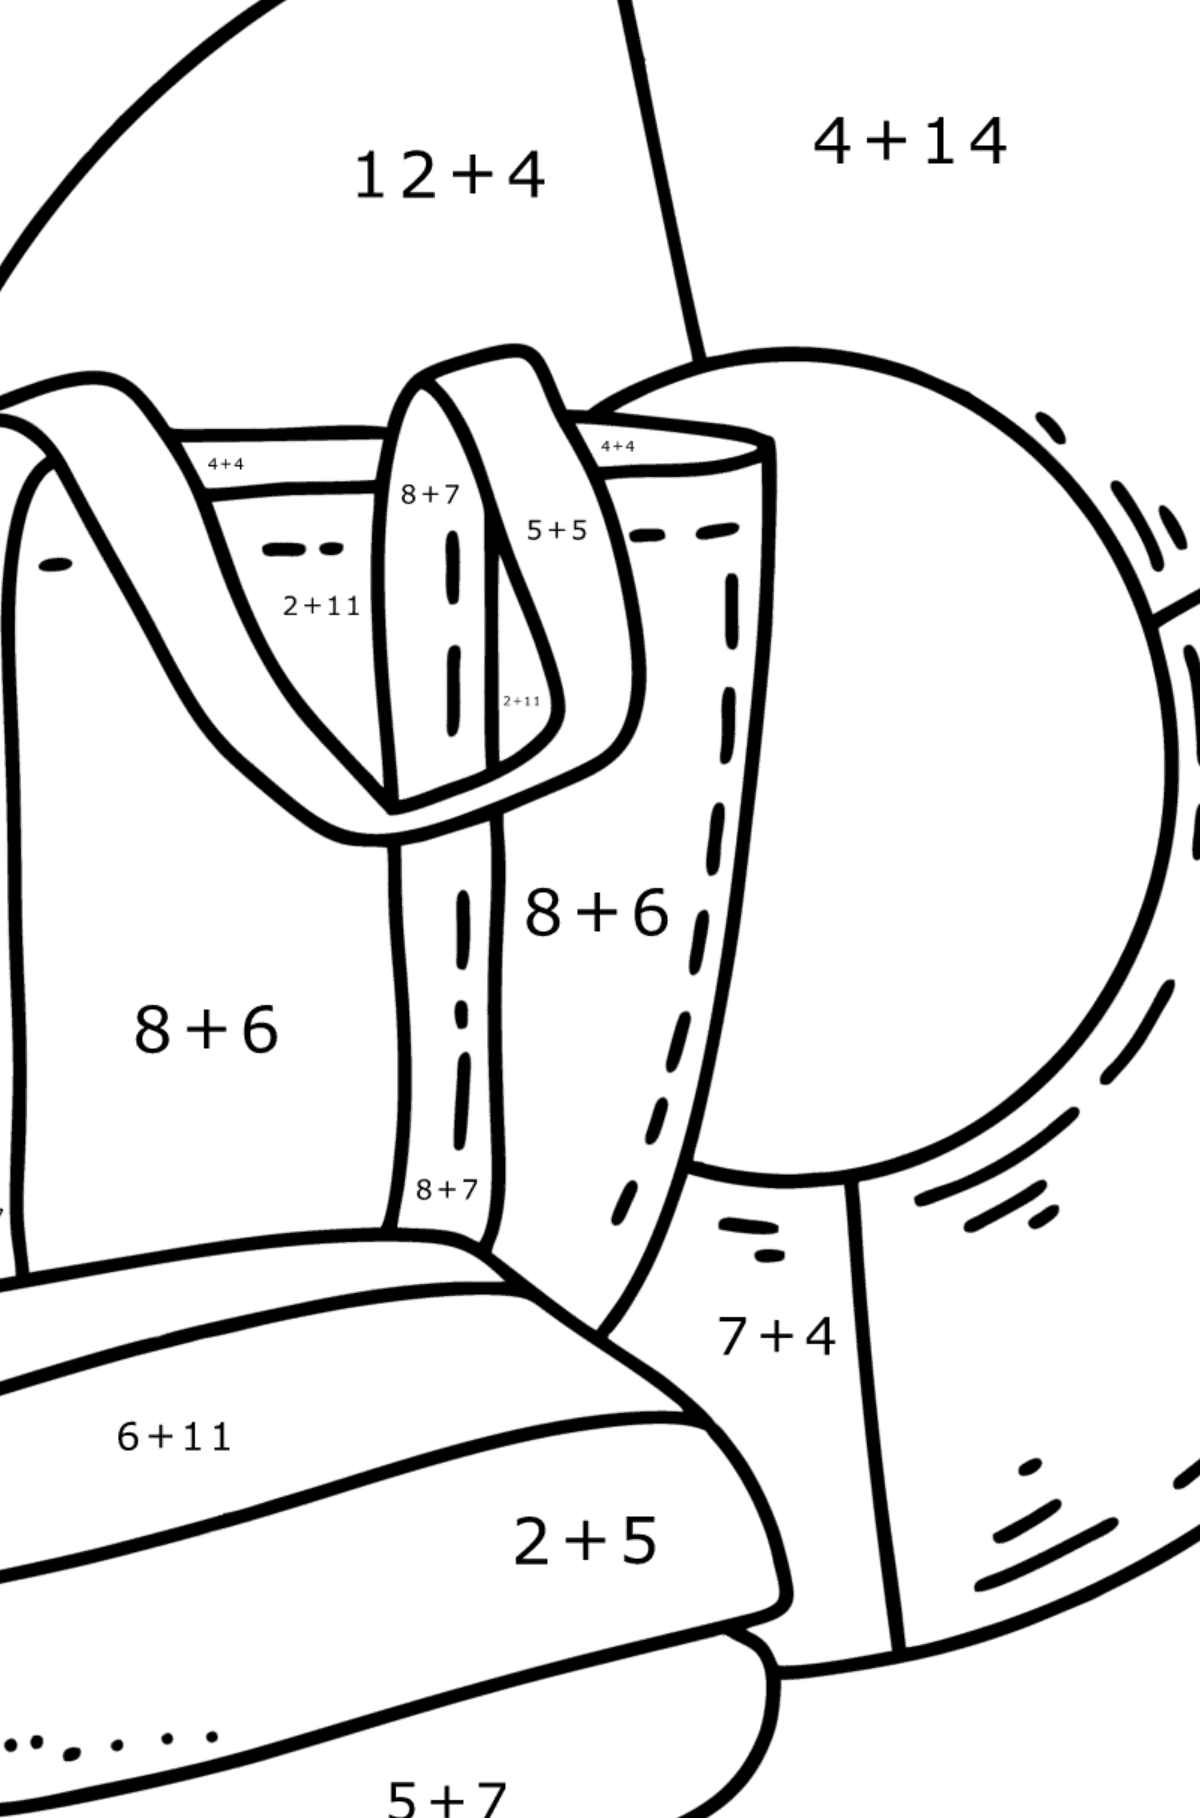 Coloring page Beach: bag and lifebuoy - Math Coloring - Addition for Kids